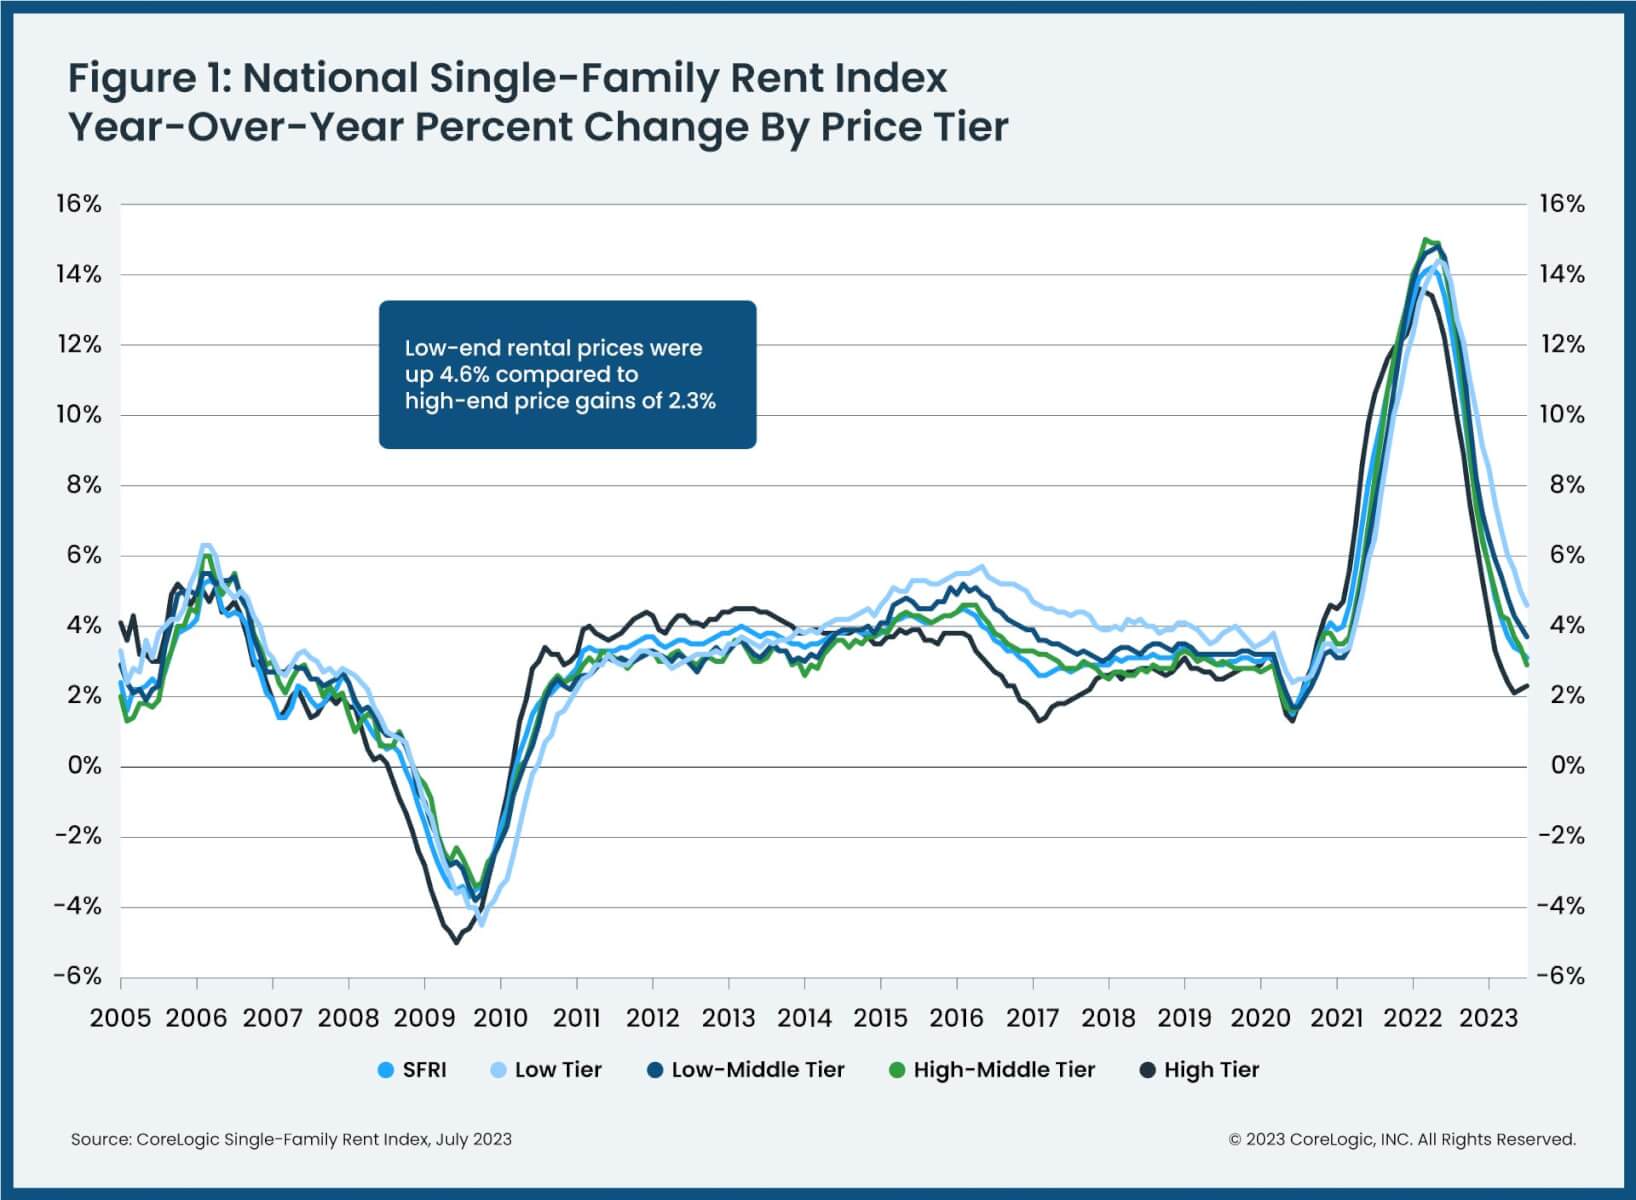 U.S. single-family rent changes by price tier, 2005-2023.